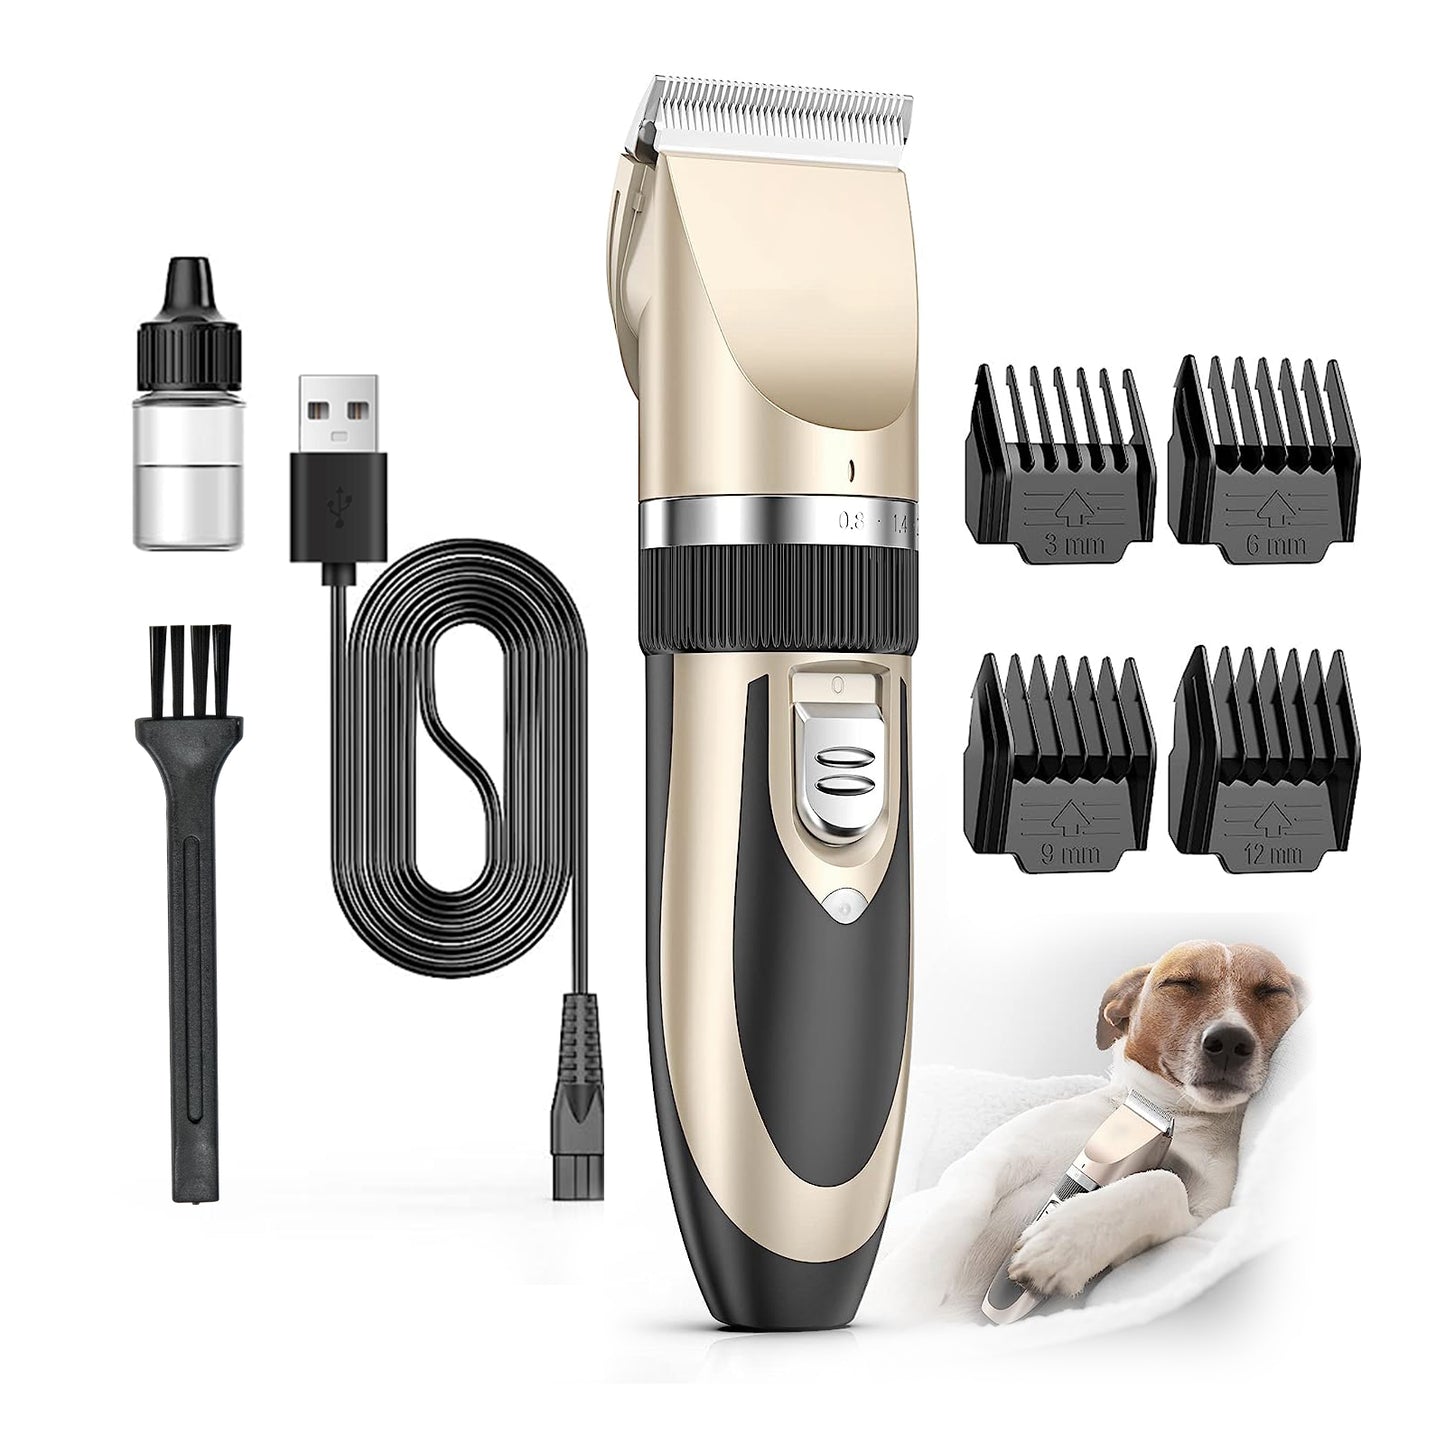 Rechargeable Cordless Dogs Cats Horse Grooming Clippers - Professional Pet Hair Clippers with Comb Guides for Dogs Cats Horses and Other House Animals Pet Grooming Kit